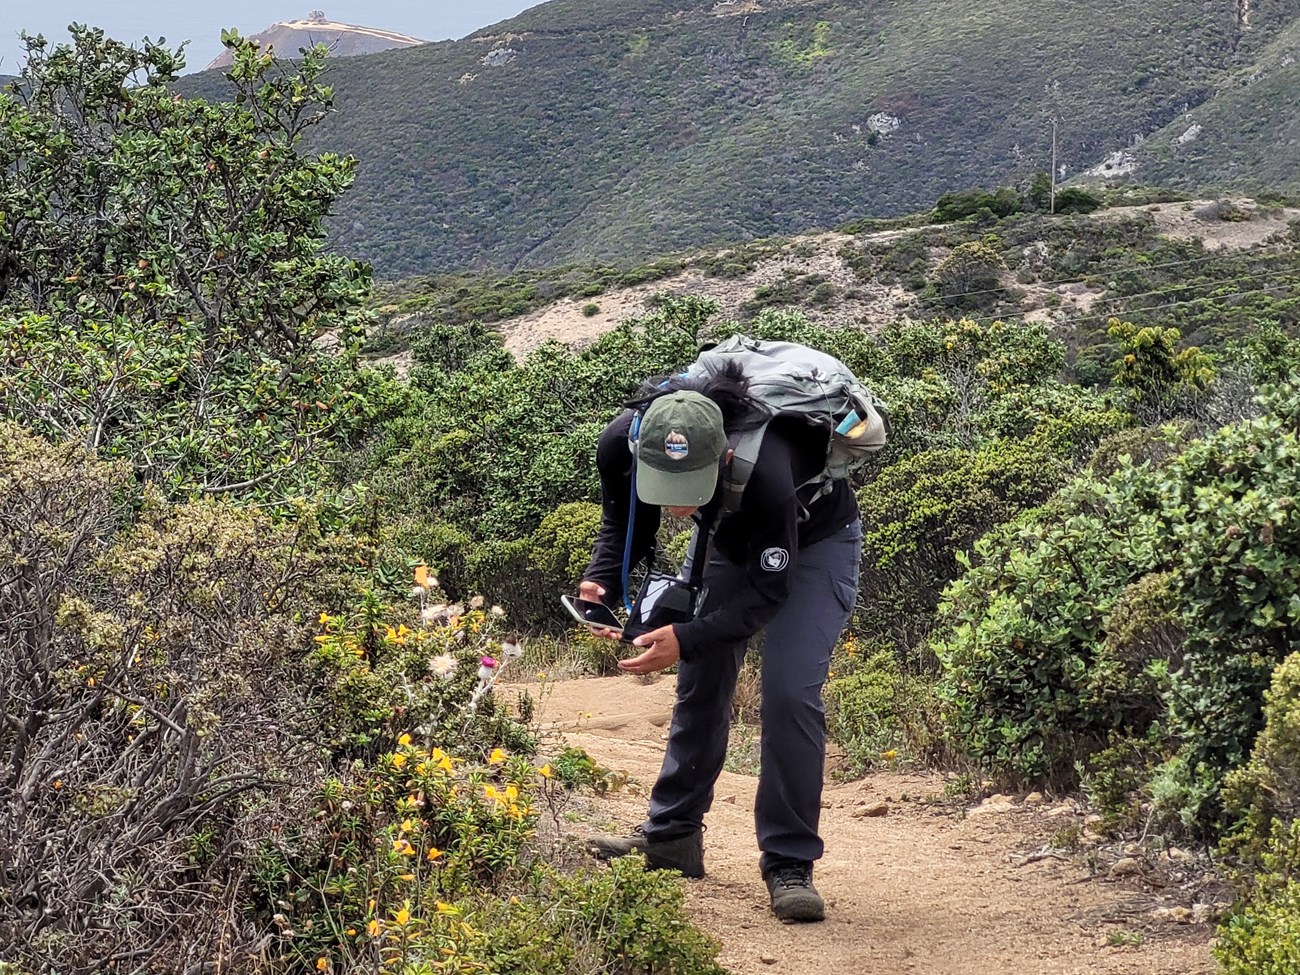 Person in hiking gear on a trail, leaning down to take a photo with a cell phone camera.